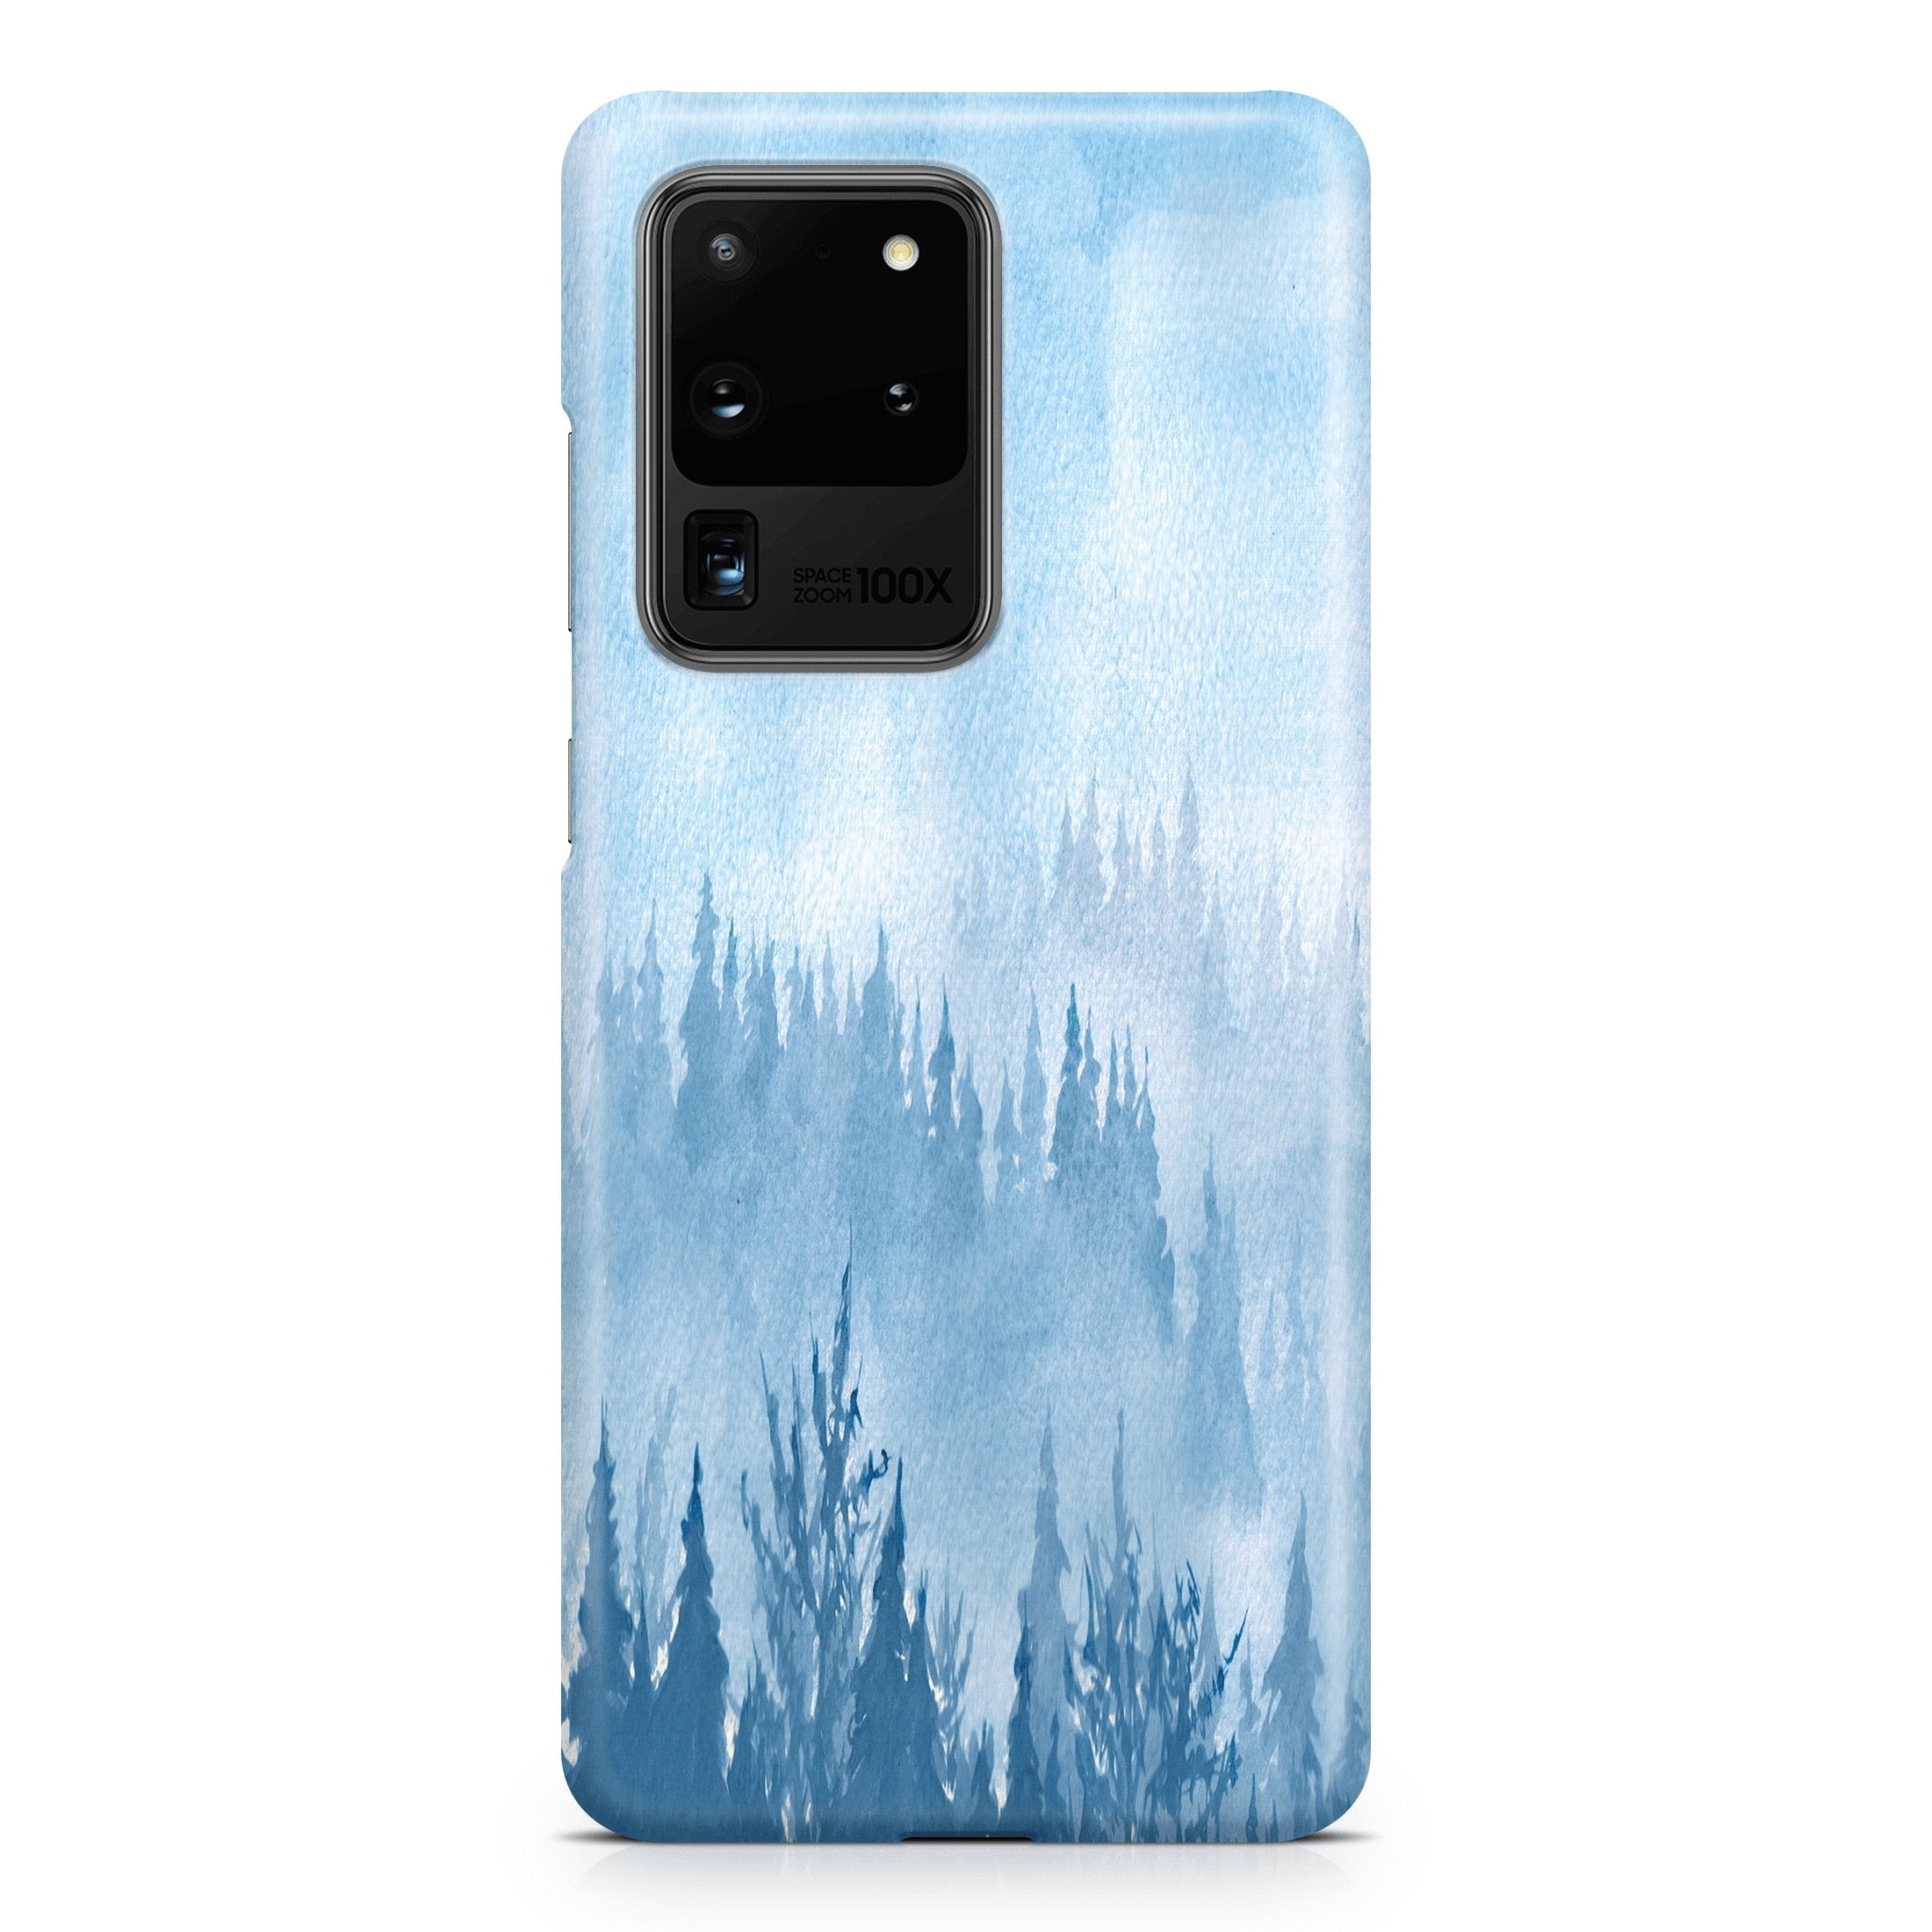 Foggy Blue - Samsung phone case designs by CaseSwagger